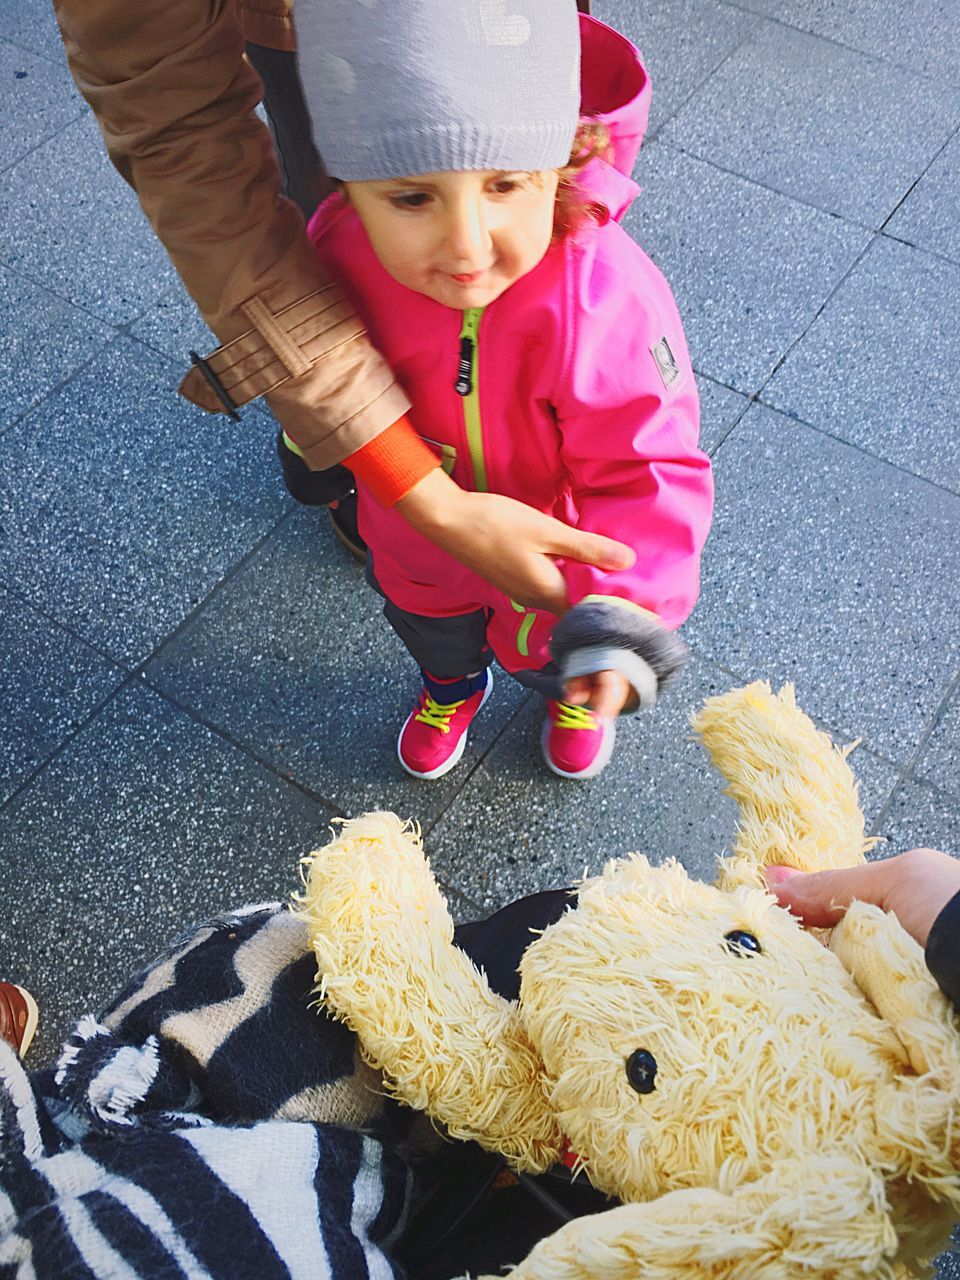 childhood, child, real people, women, toy, girls, females, lifestyles, high angle view, two people, leisure activity, stuffed toy, day, innocence, people, city, cute, full length, footpath, teddy bear